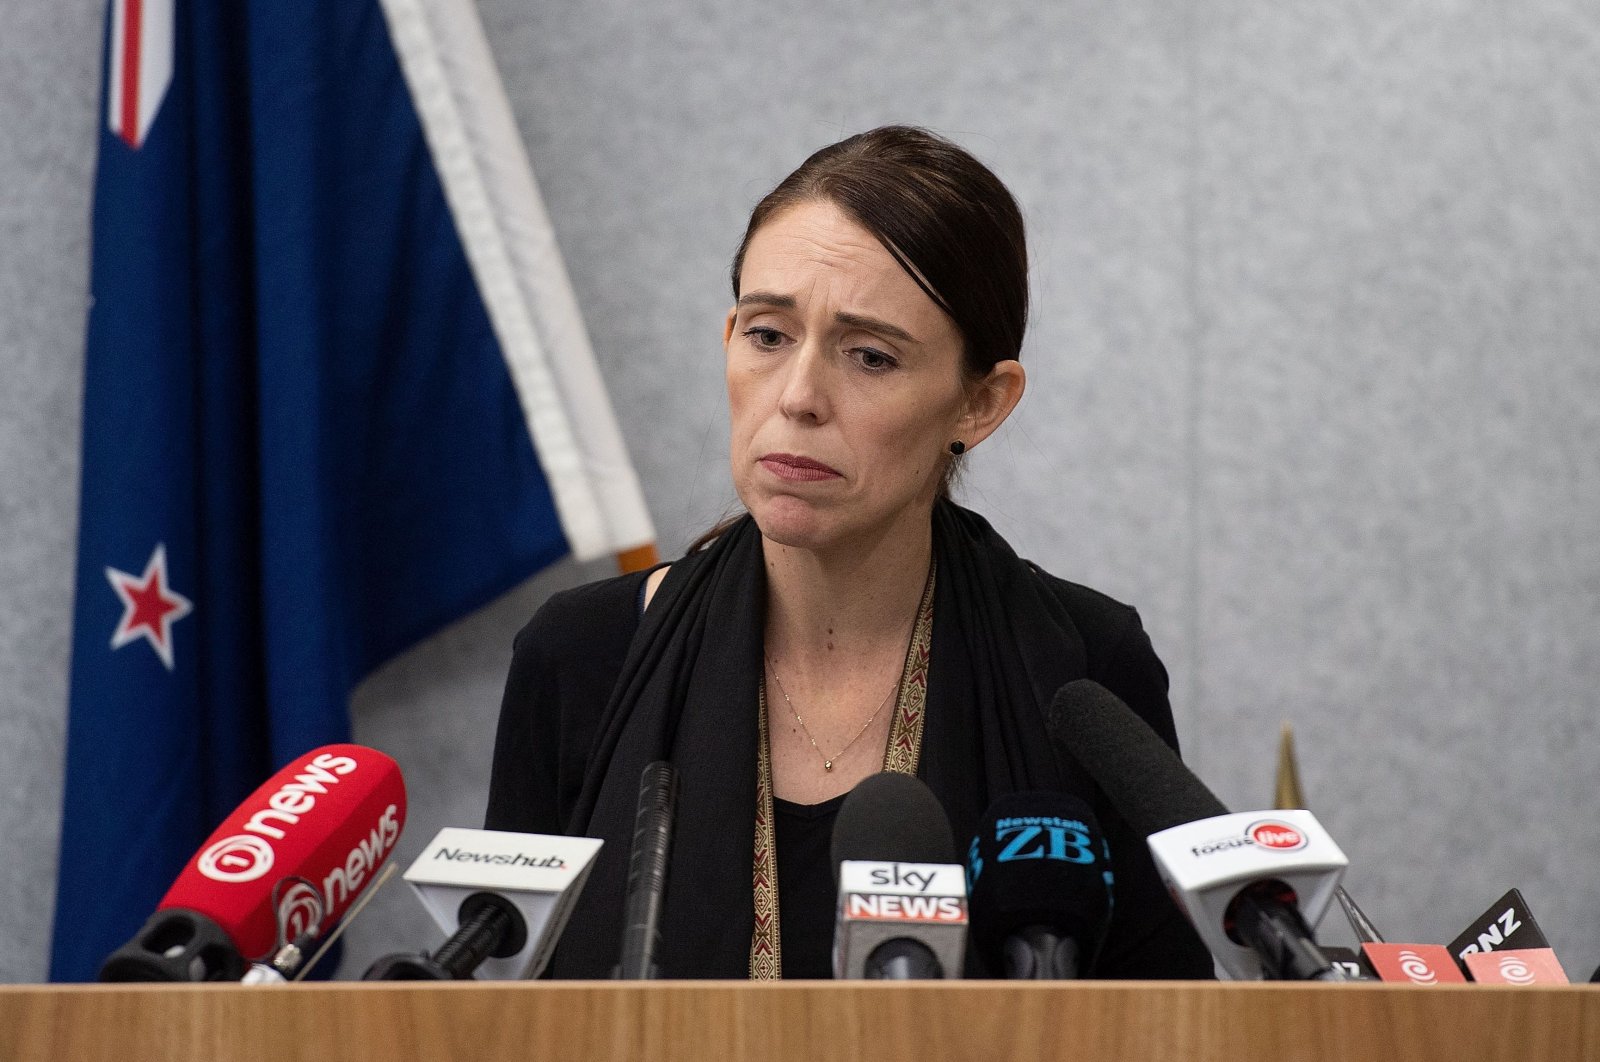 New Zealand Prime Minister Jacinda Ardern speaks to the media during a news conference at the Justice Precinct in Christchurch, New Zealand March 16, 2019. (AFP Photo)